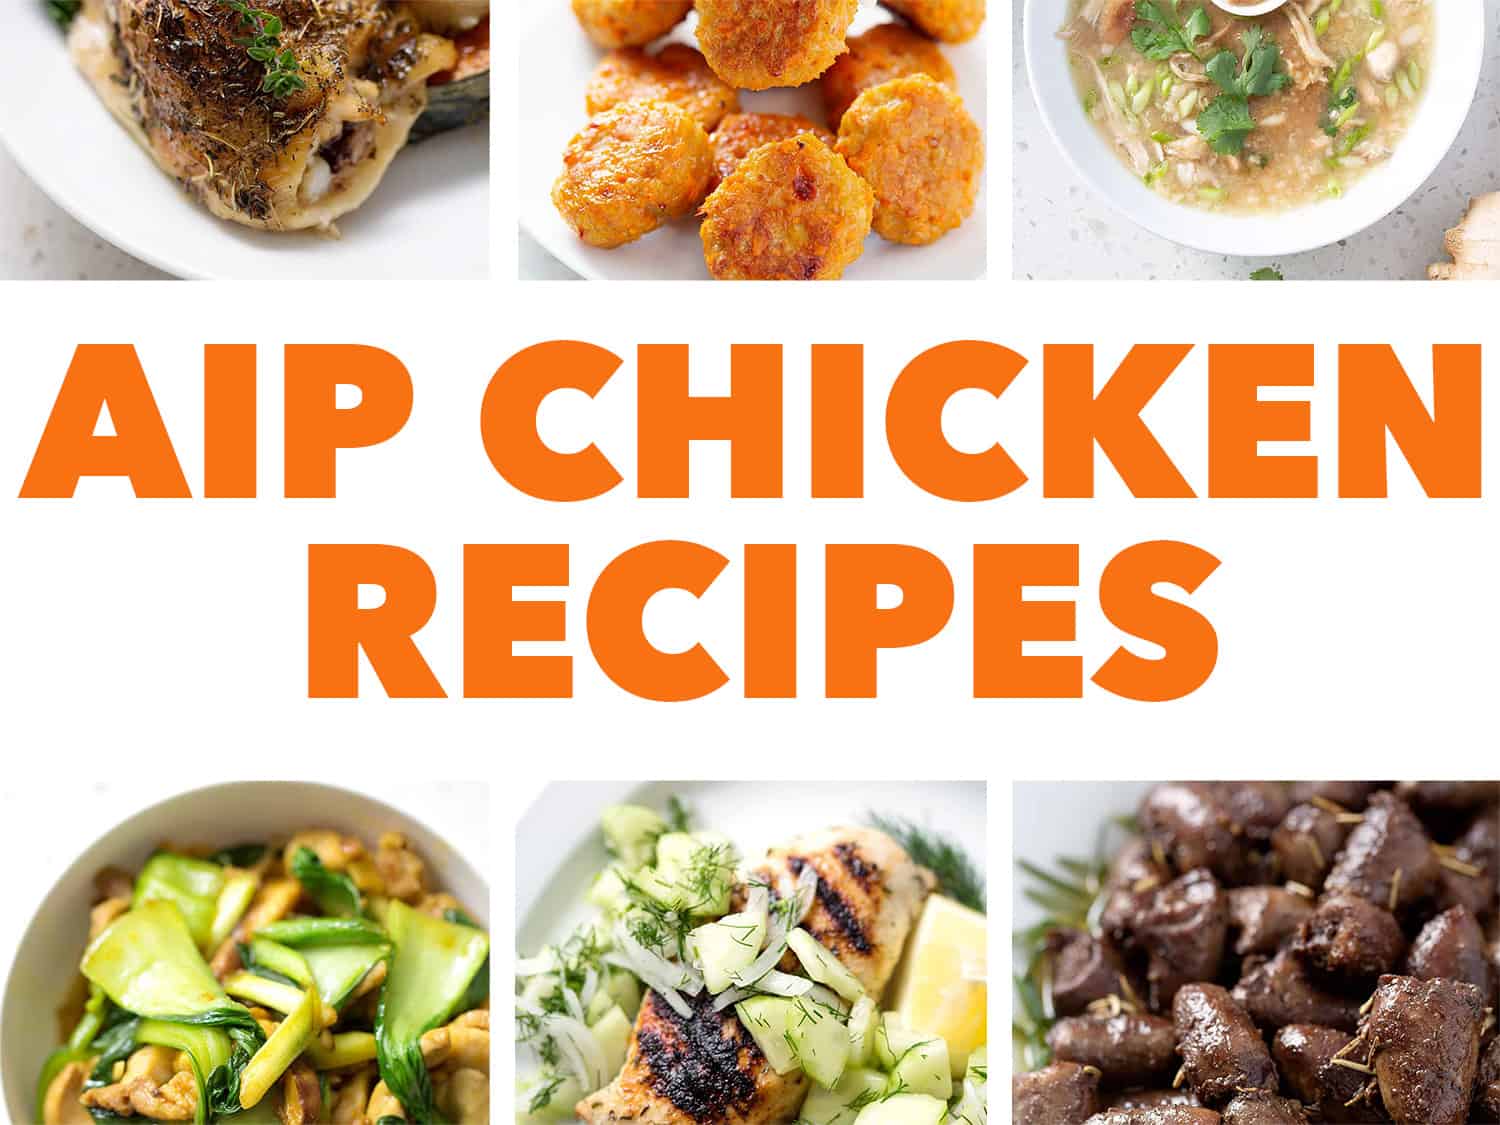 the words and pictures of AIP chicken recipes